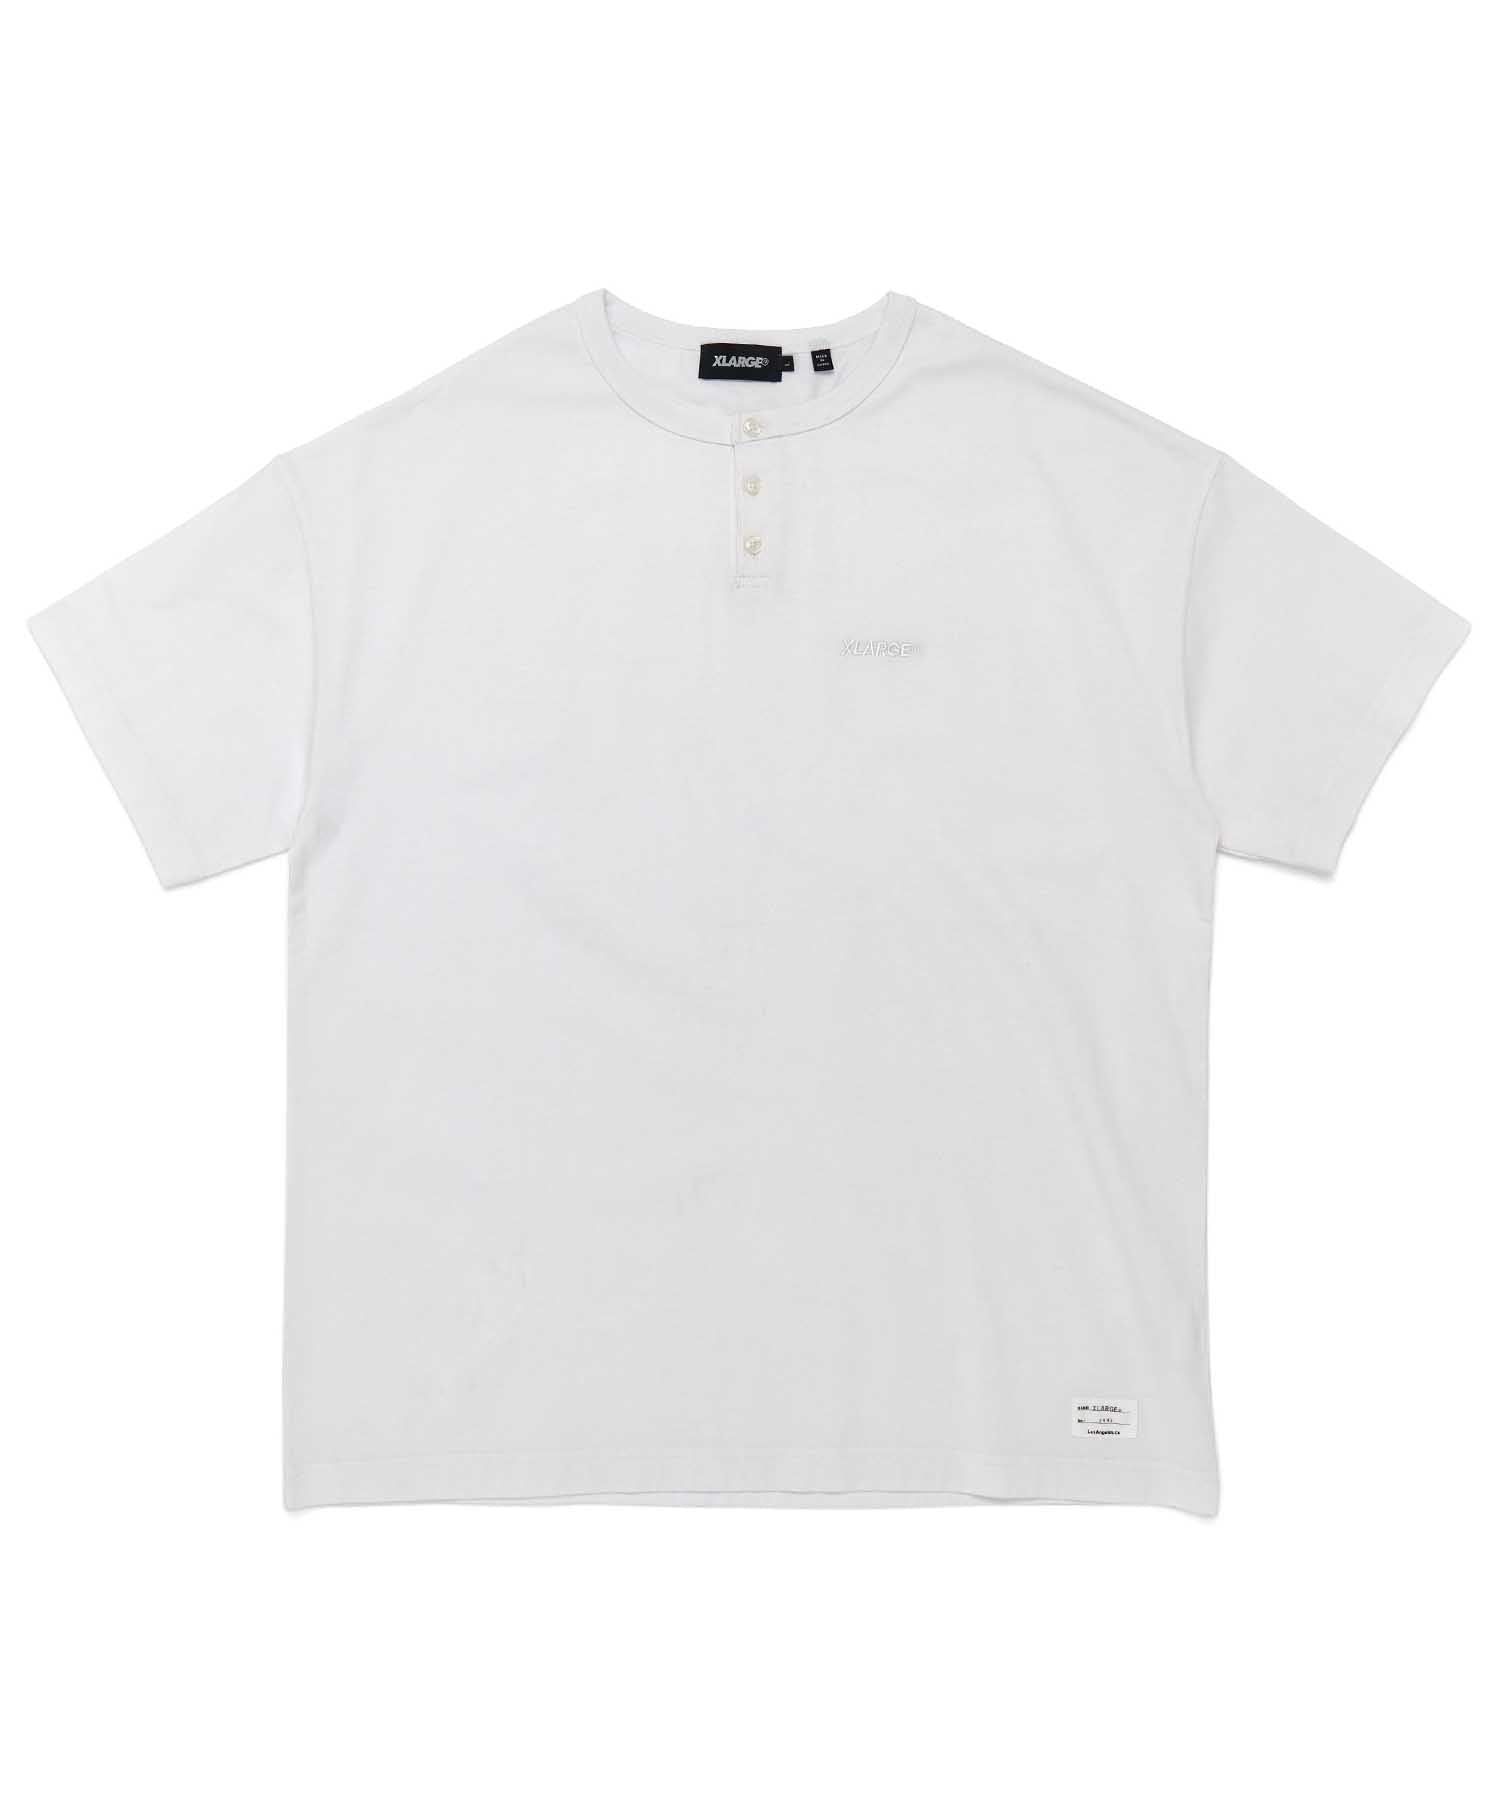 S/S EMBROIDERY HENLEY TEE KNITS XLARGE  